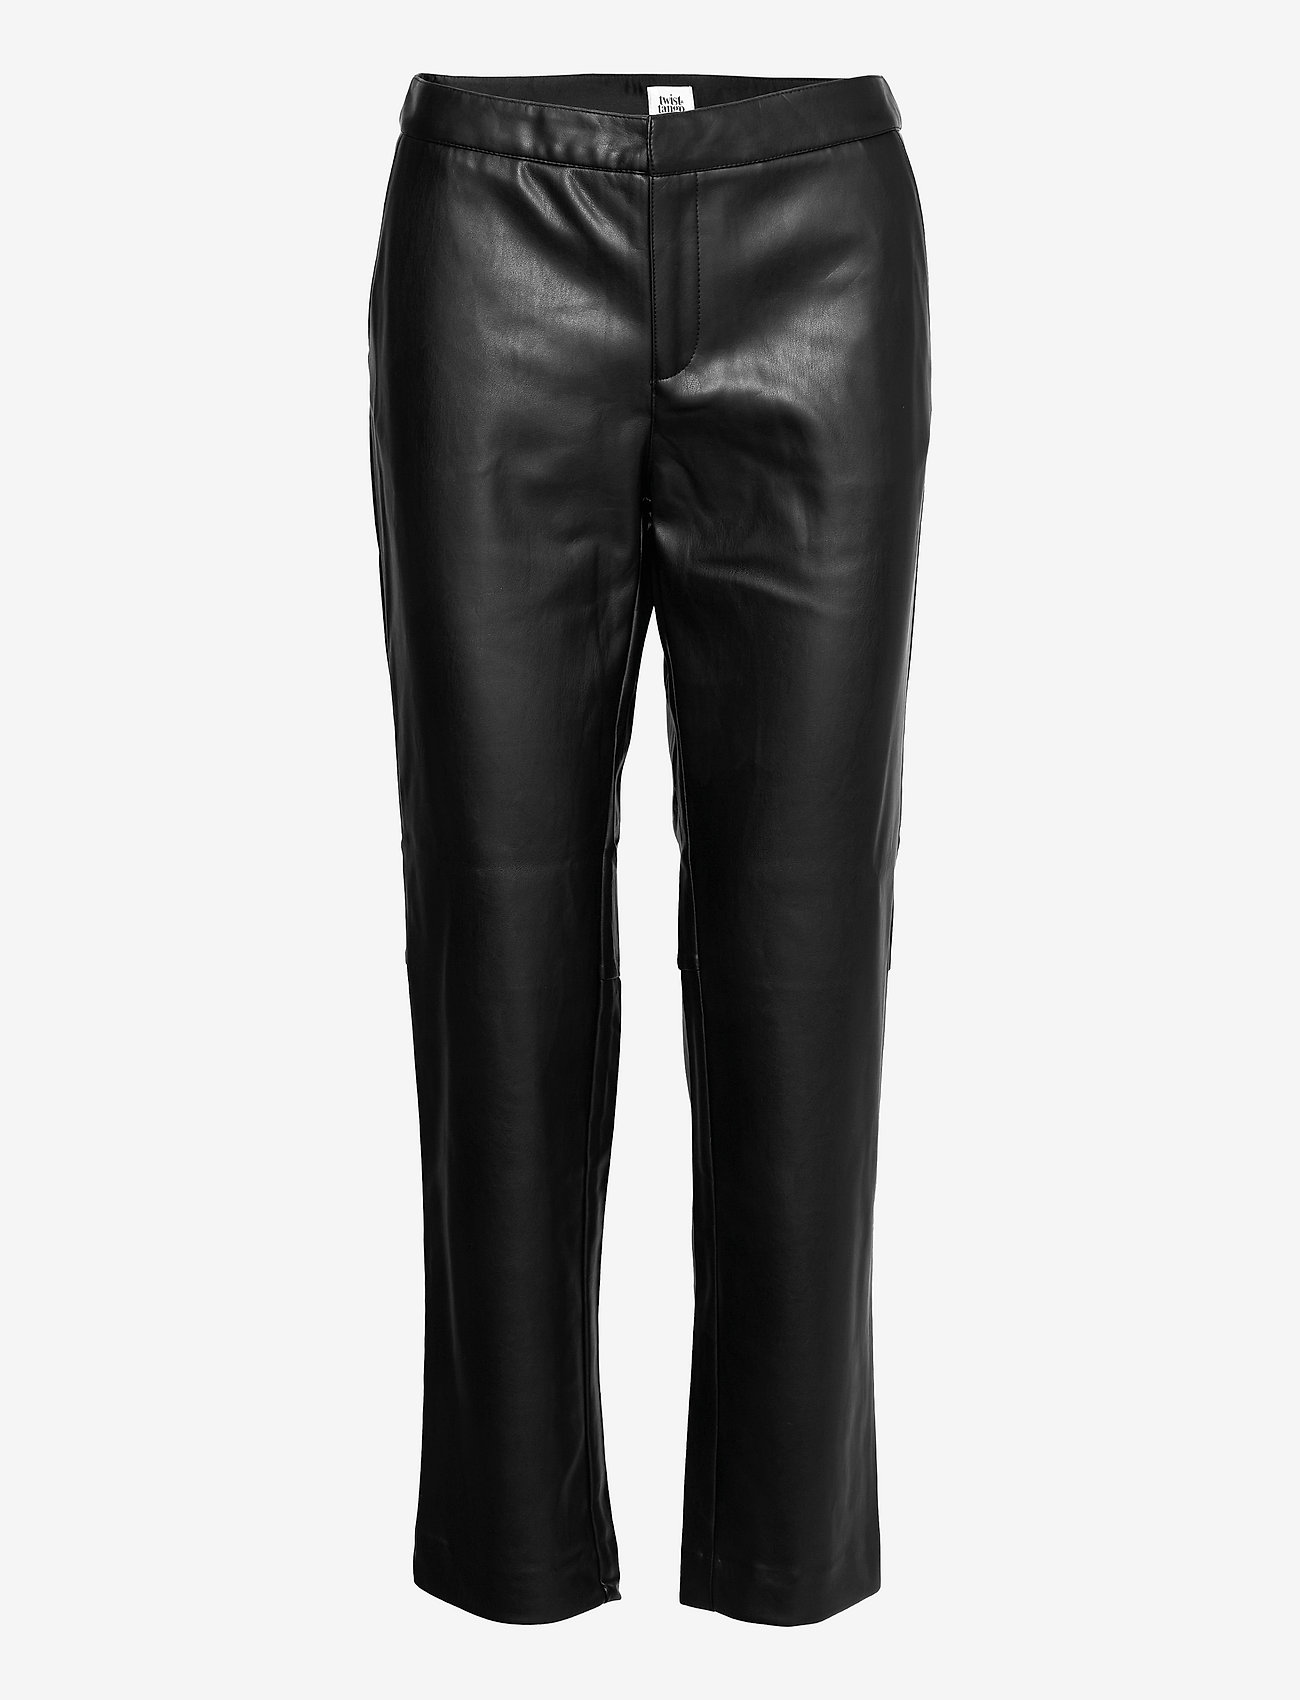 Twist & Tango - Camilla Trousers - party wear at outlet prices - black - 0